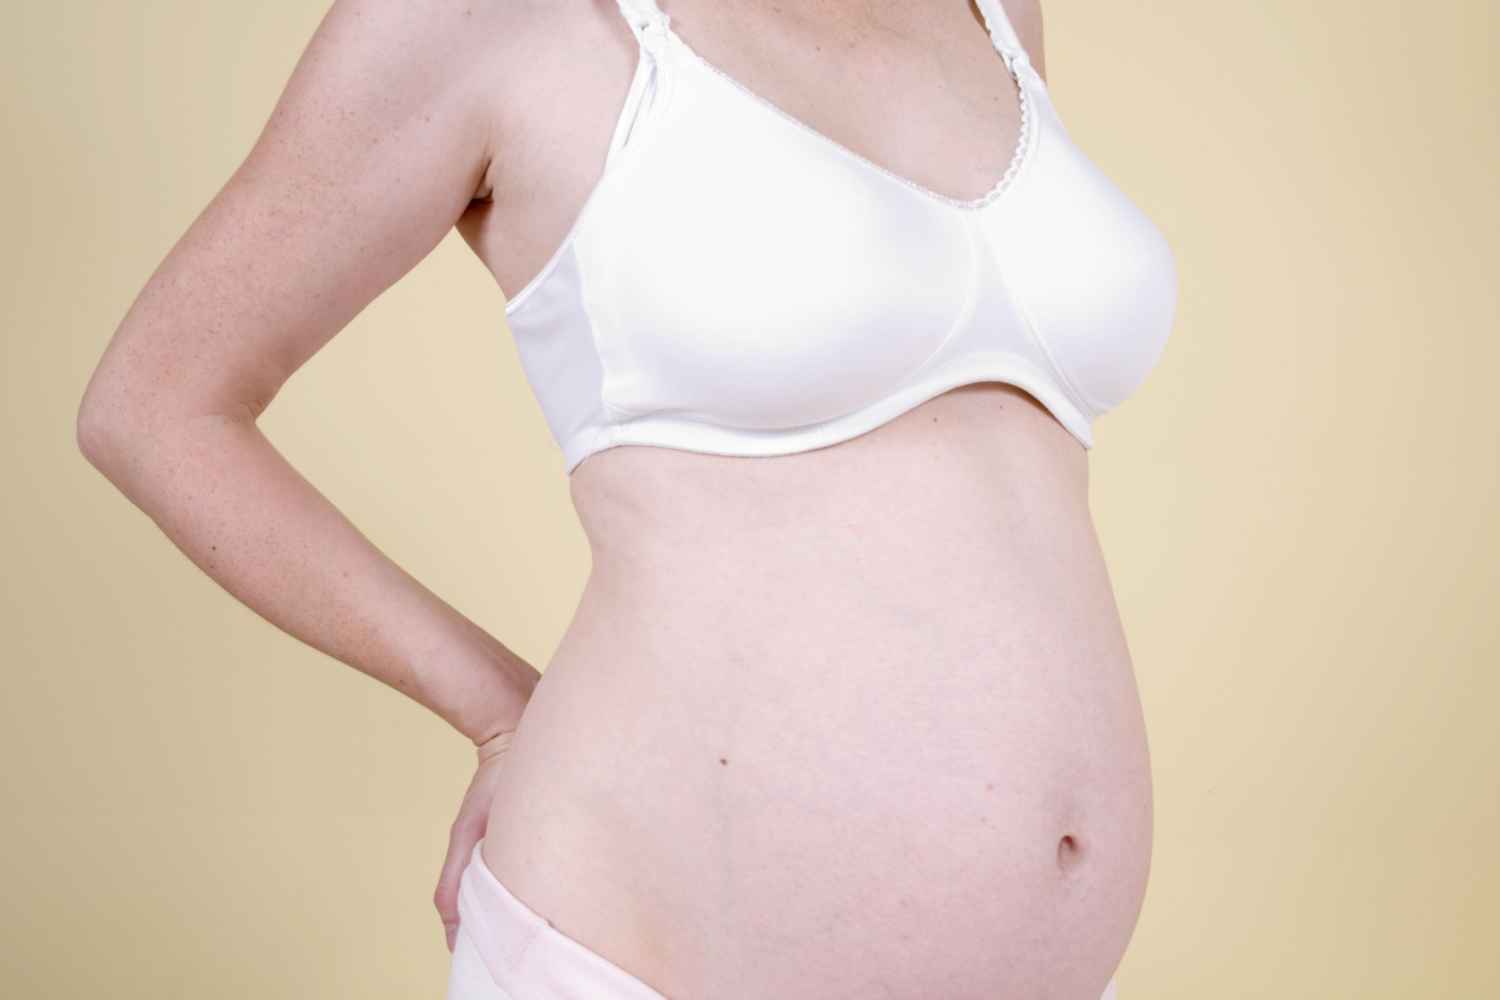 pregnant woman with visible veins on breasts